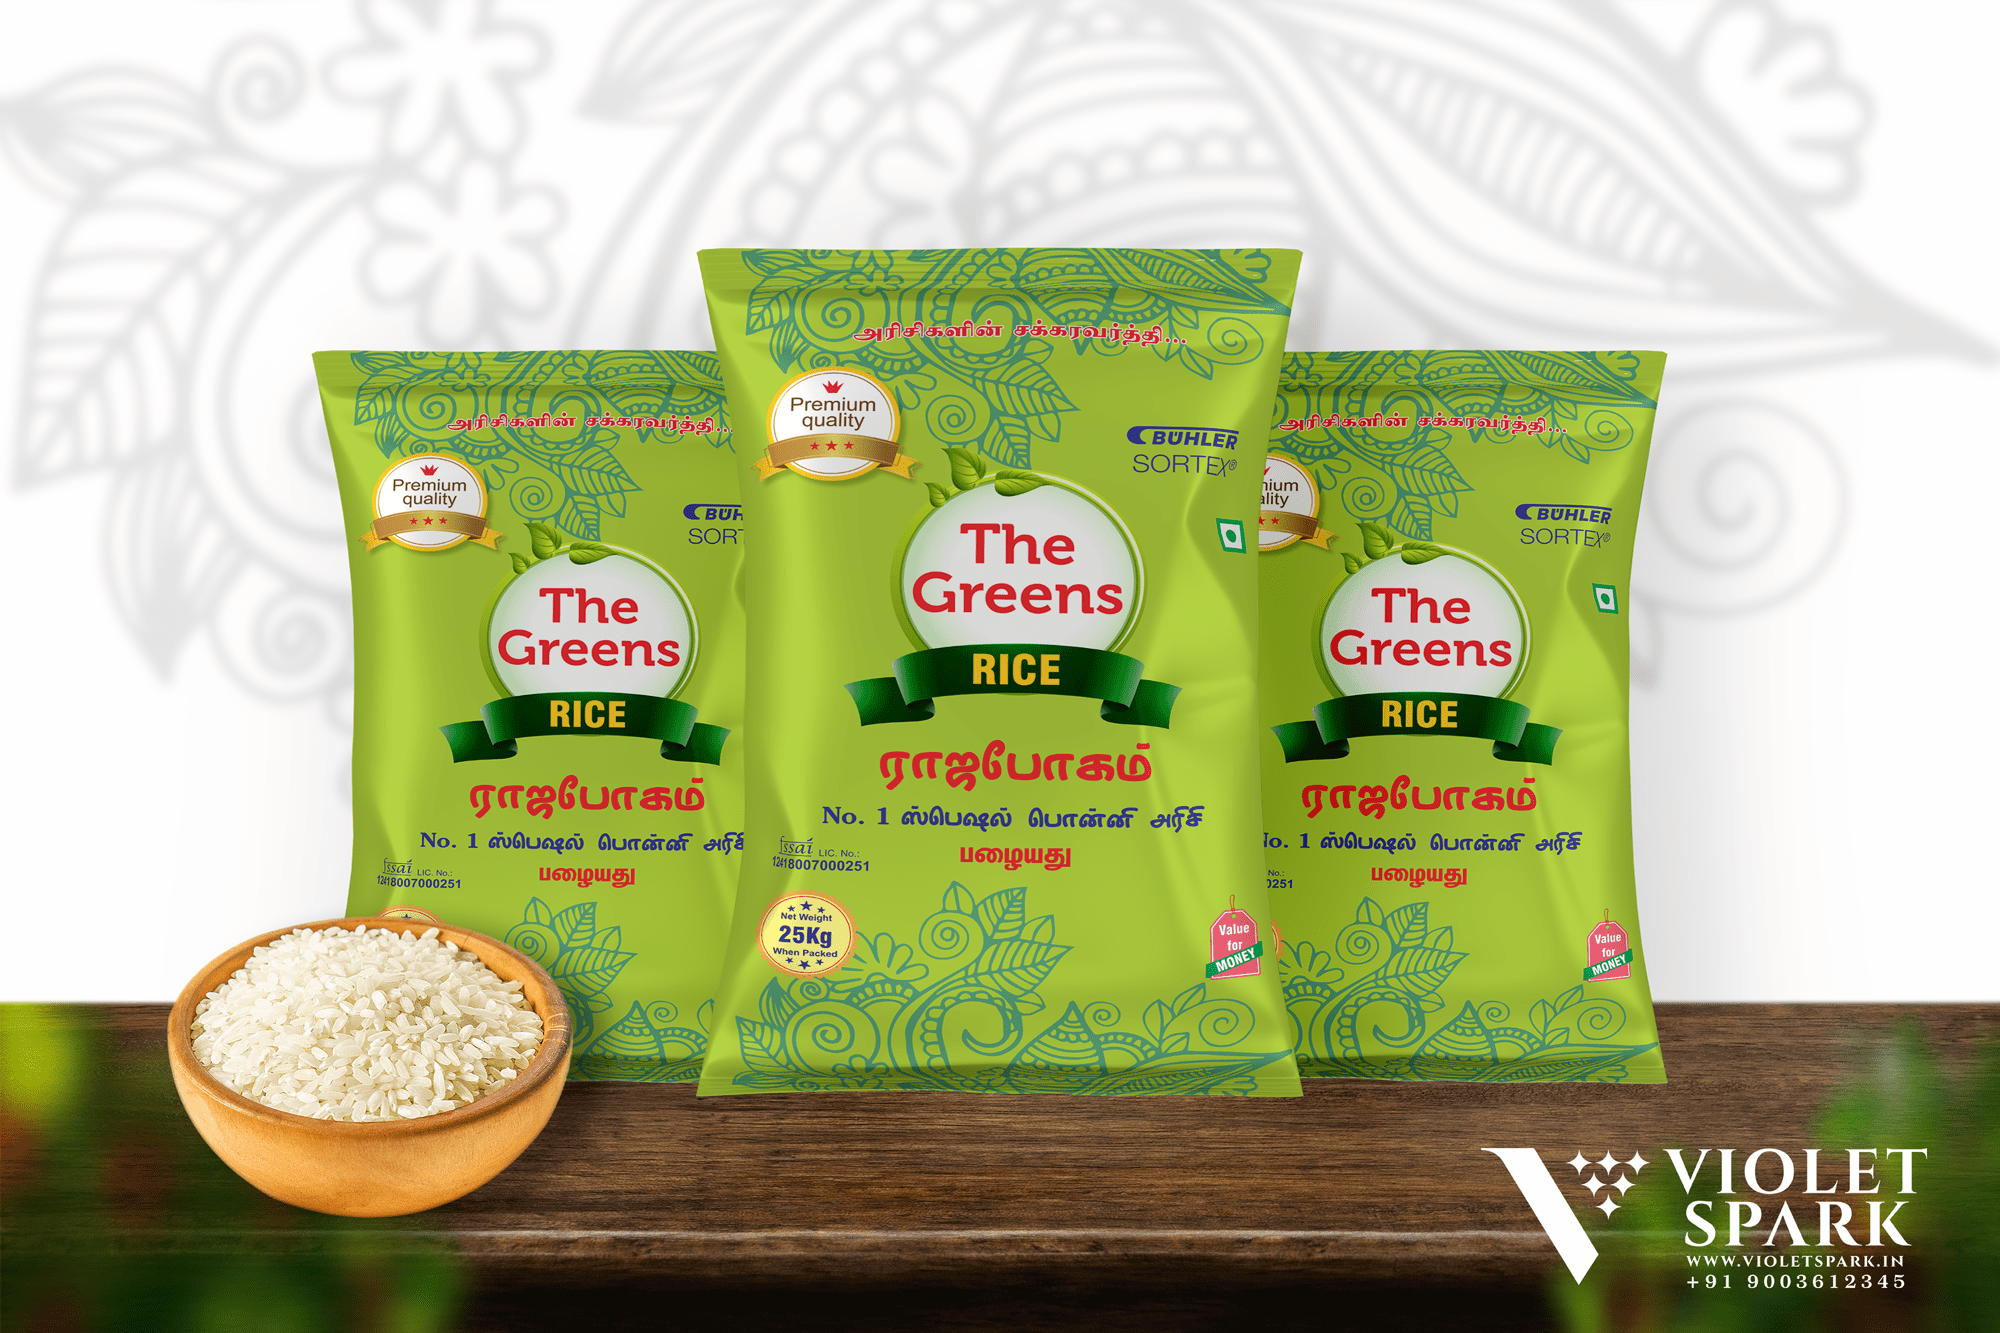 The Greens Brand Rajabhogam Rice Bags Branding & Packaging Design in Erode by Creative Prints thecreativeprints